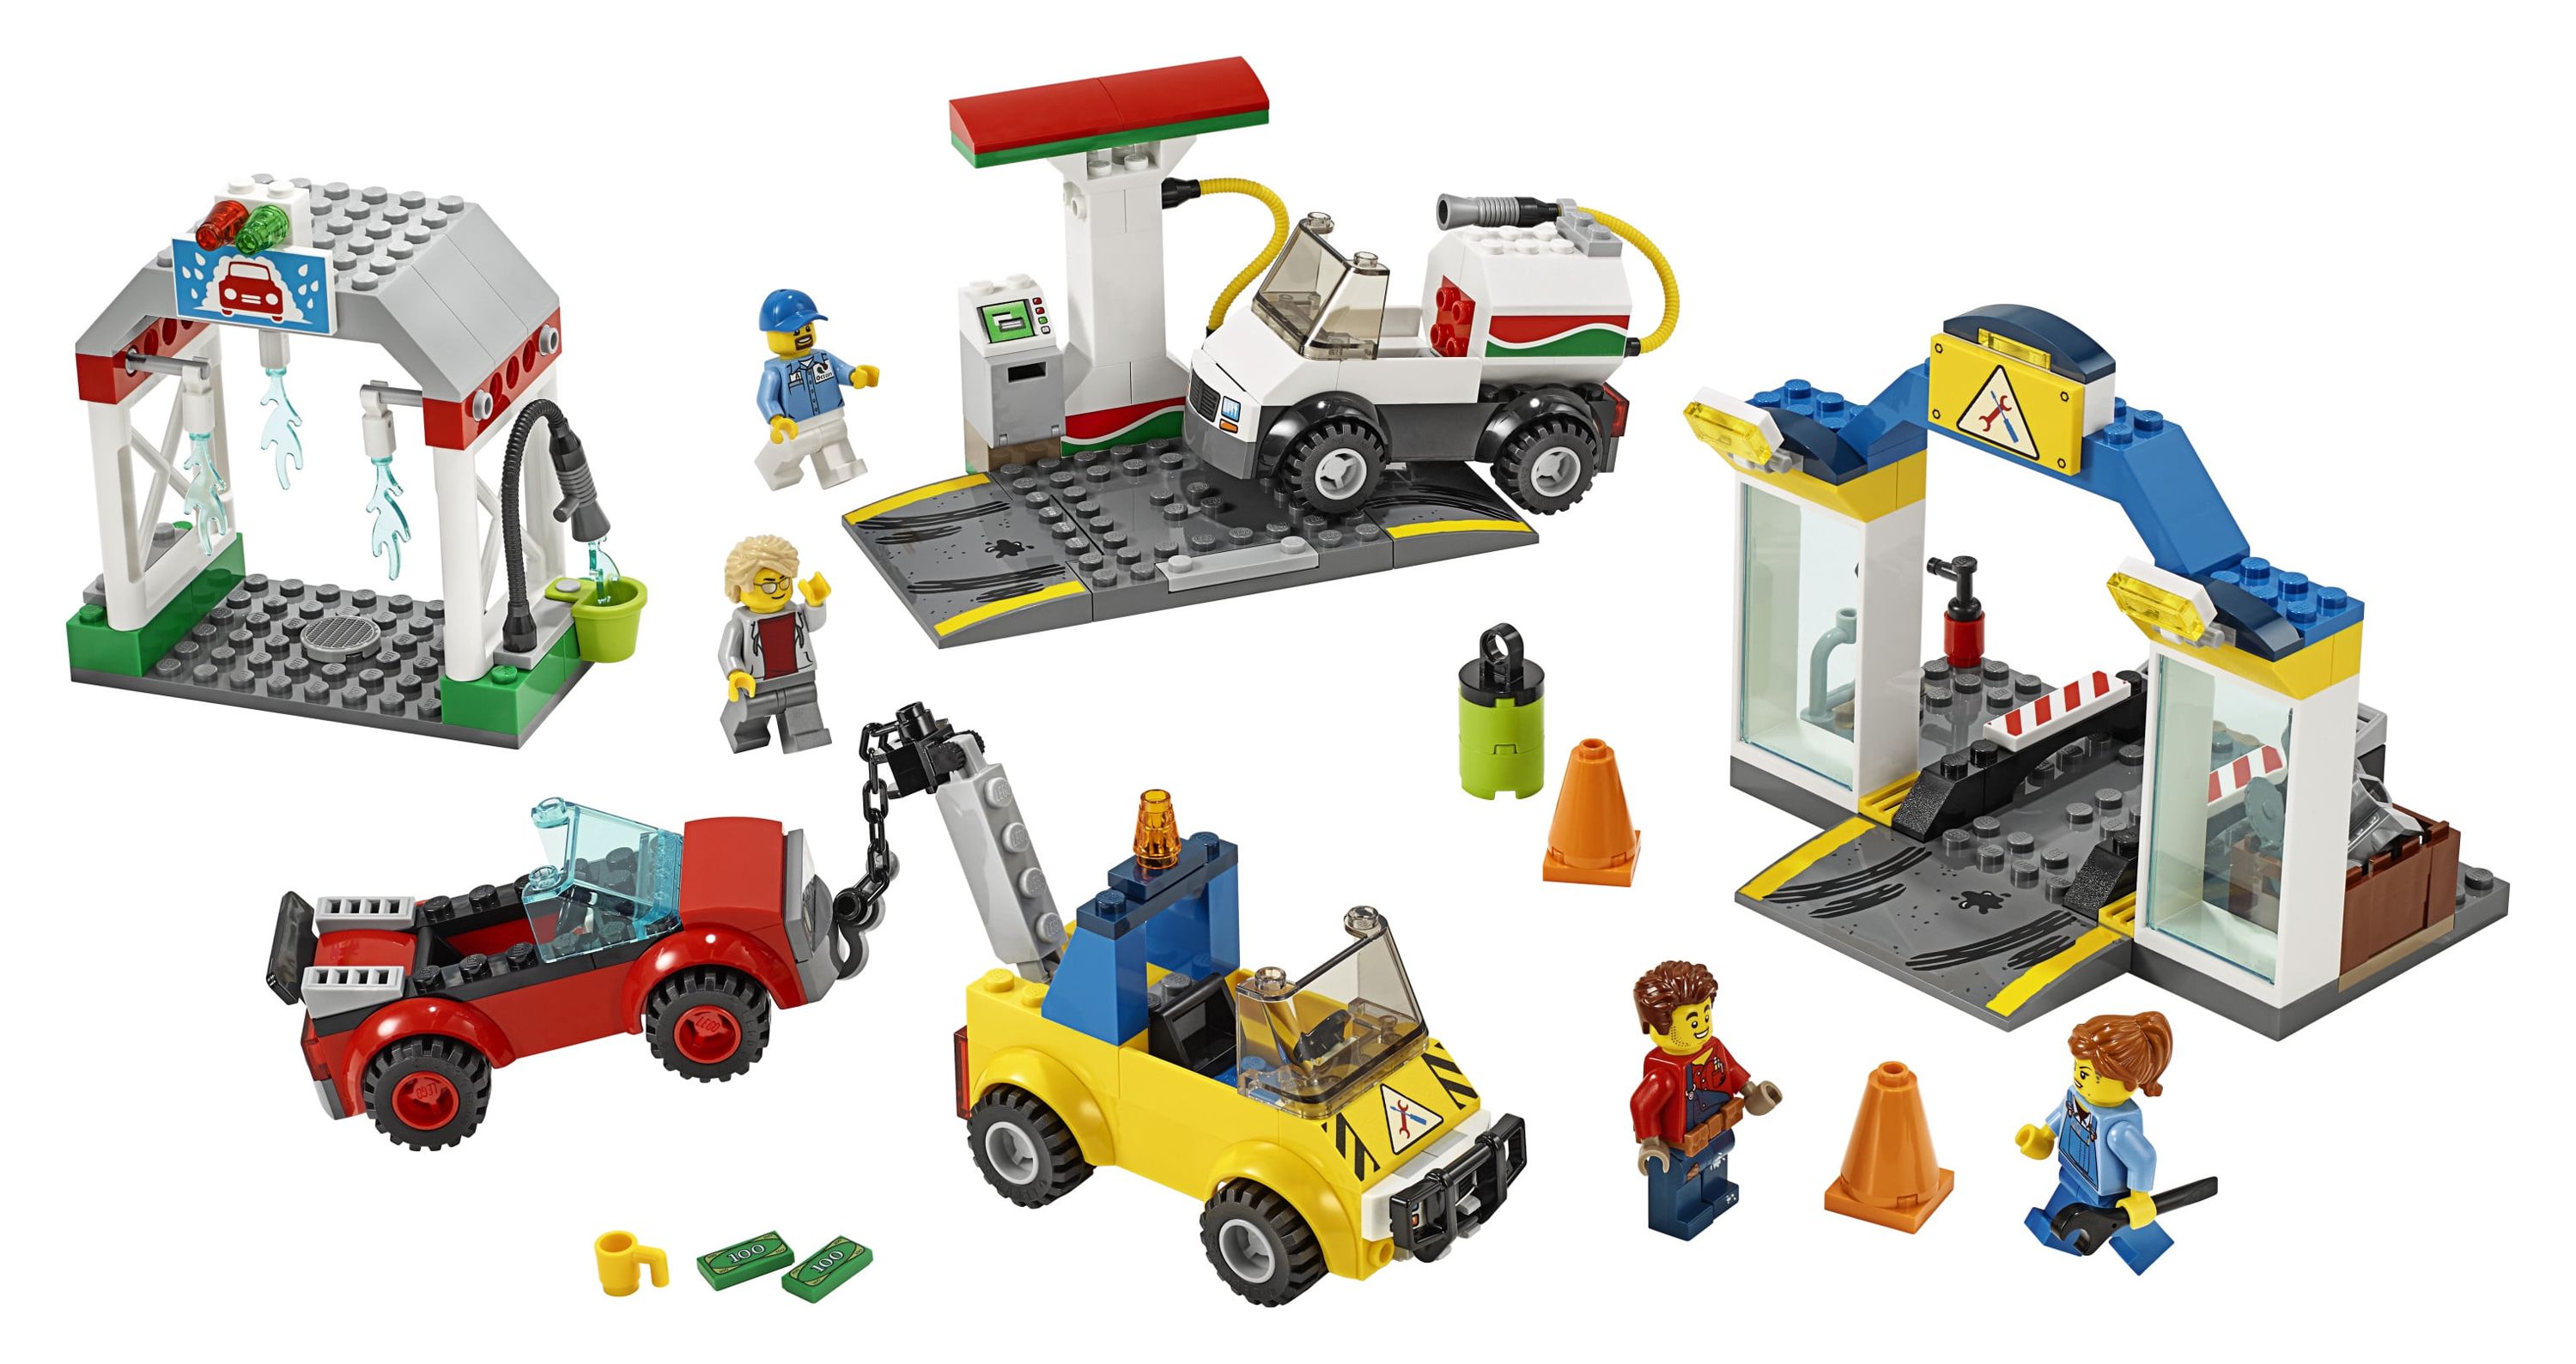 LEGO City Garage Center 60232 Preschool Kids Building Toy Truck Car Garage Gas Station Learning Play Kit (234 Pieces) - image 1 of 6